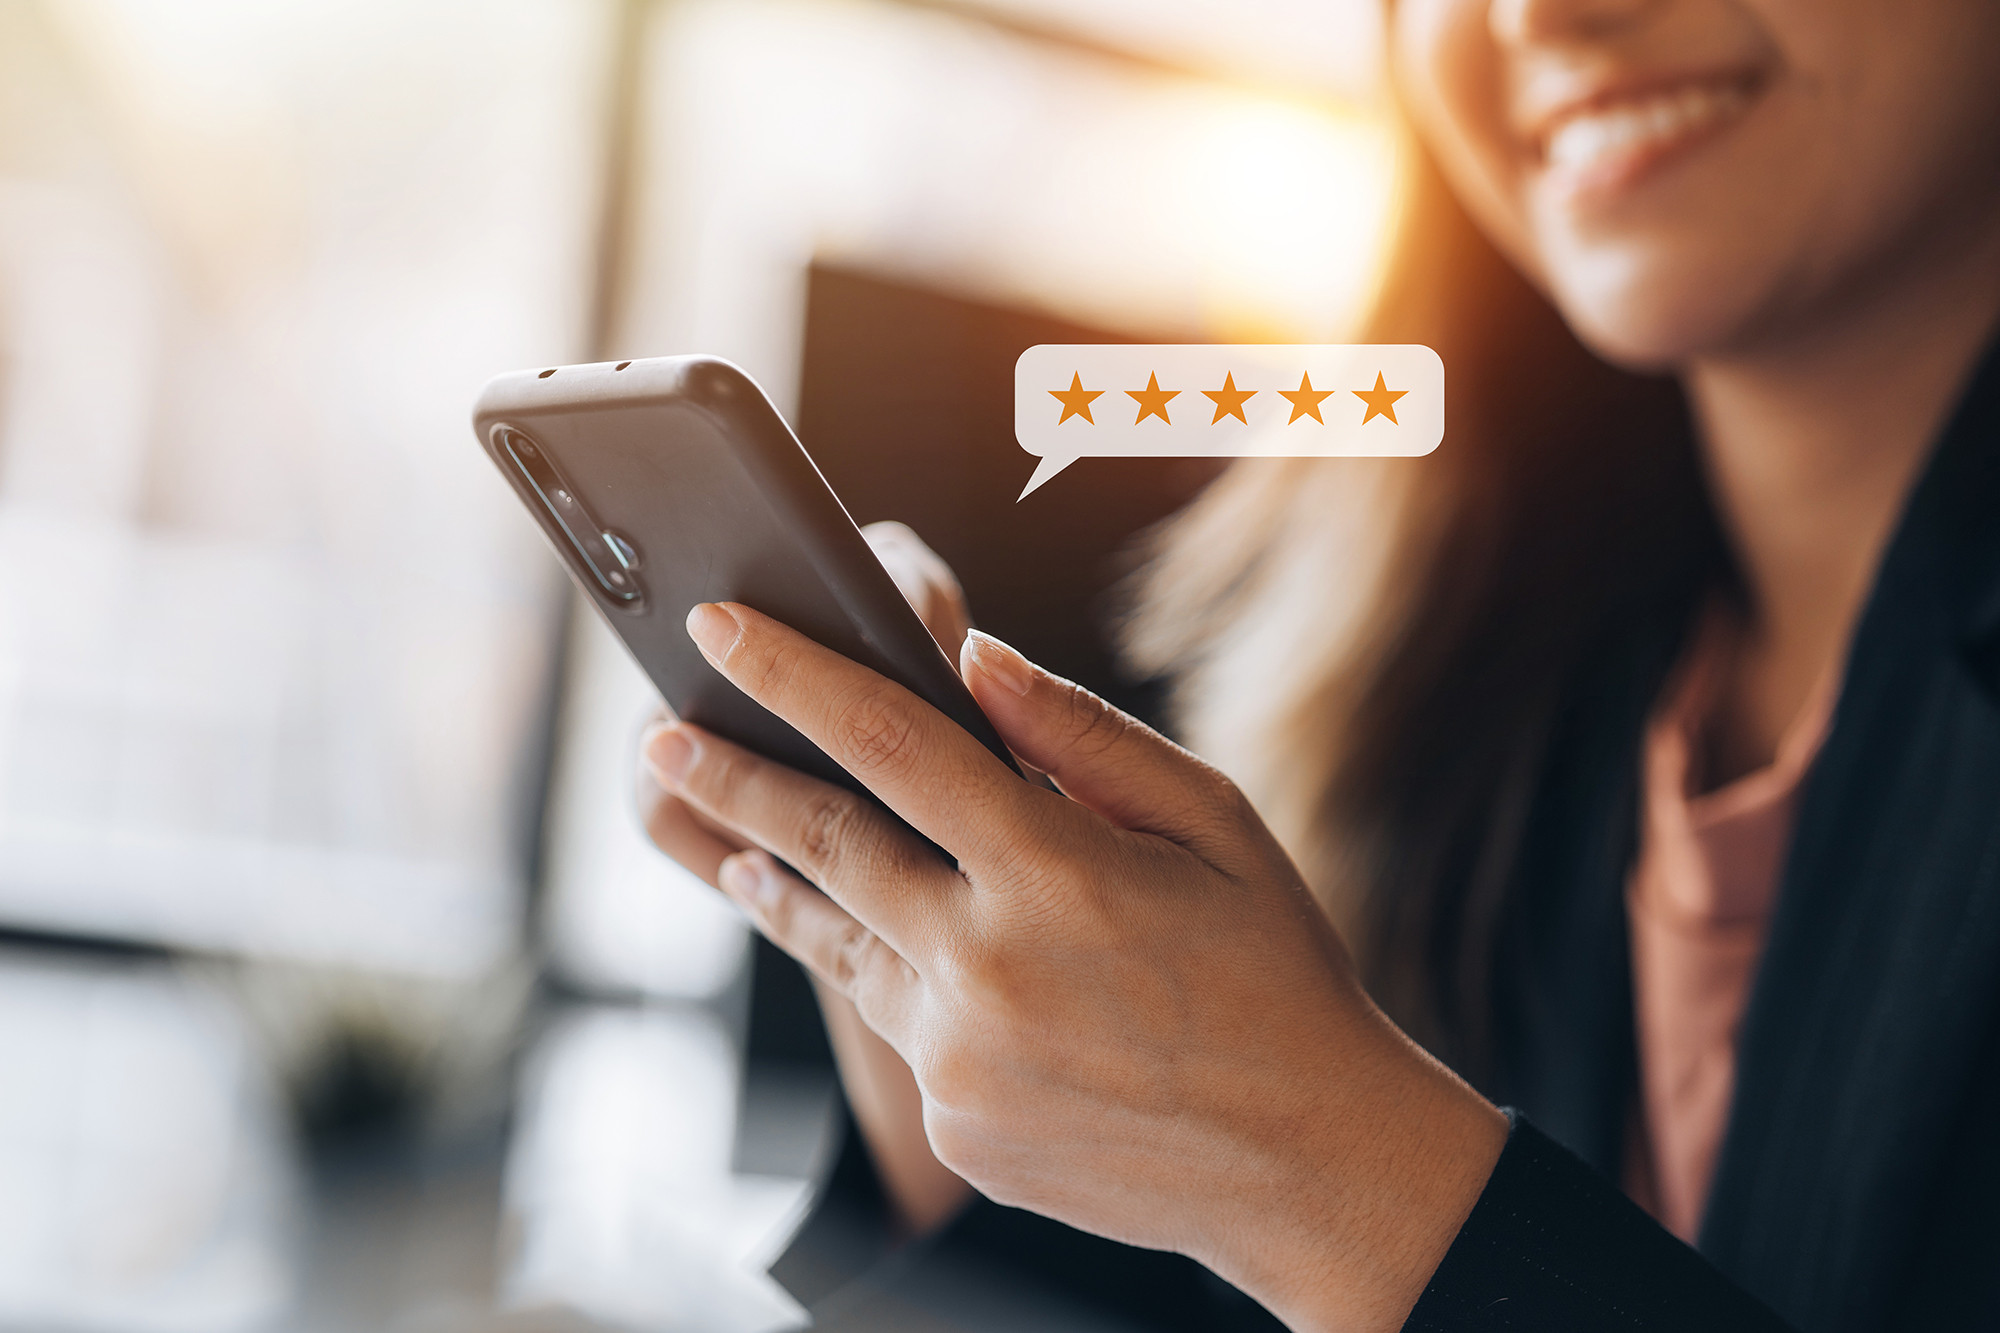 Smiling woman holding a smartphone with a five star rating graphic superimposed on the image.